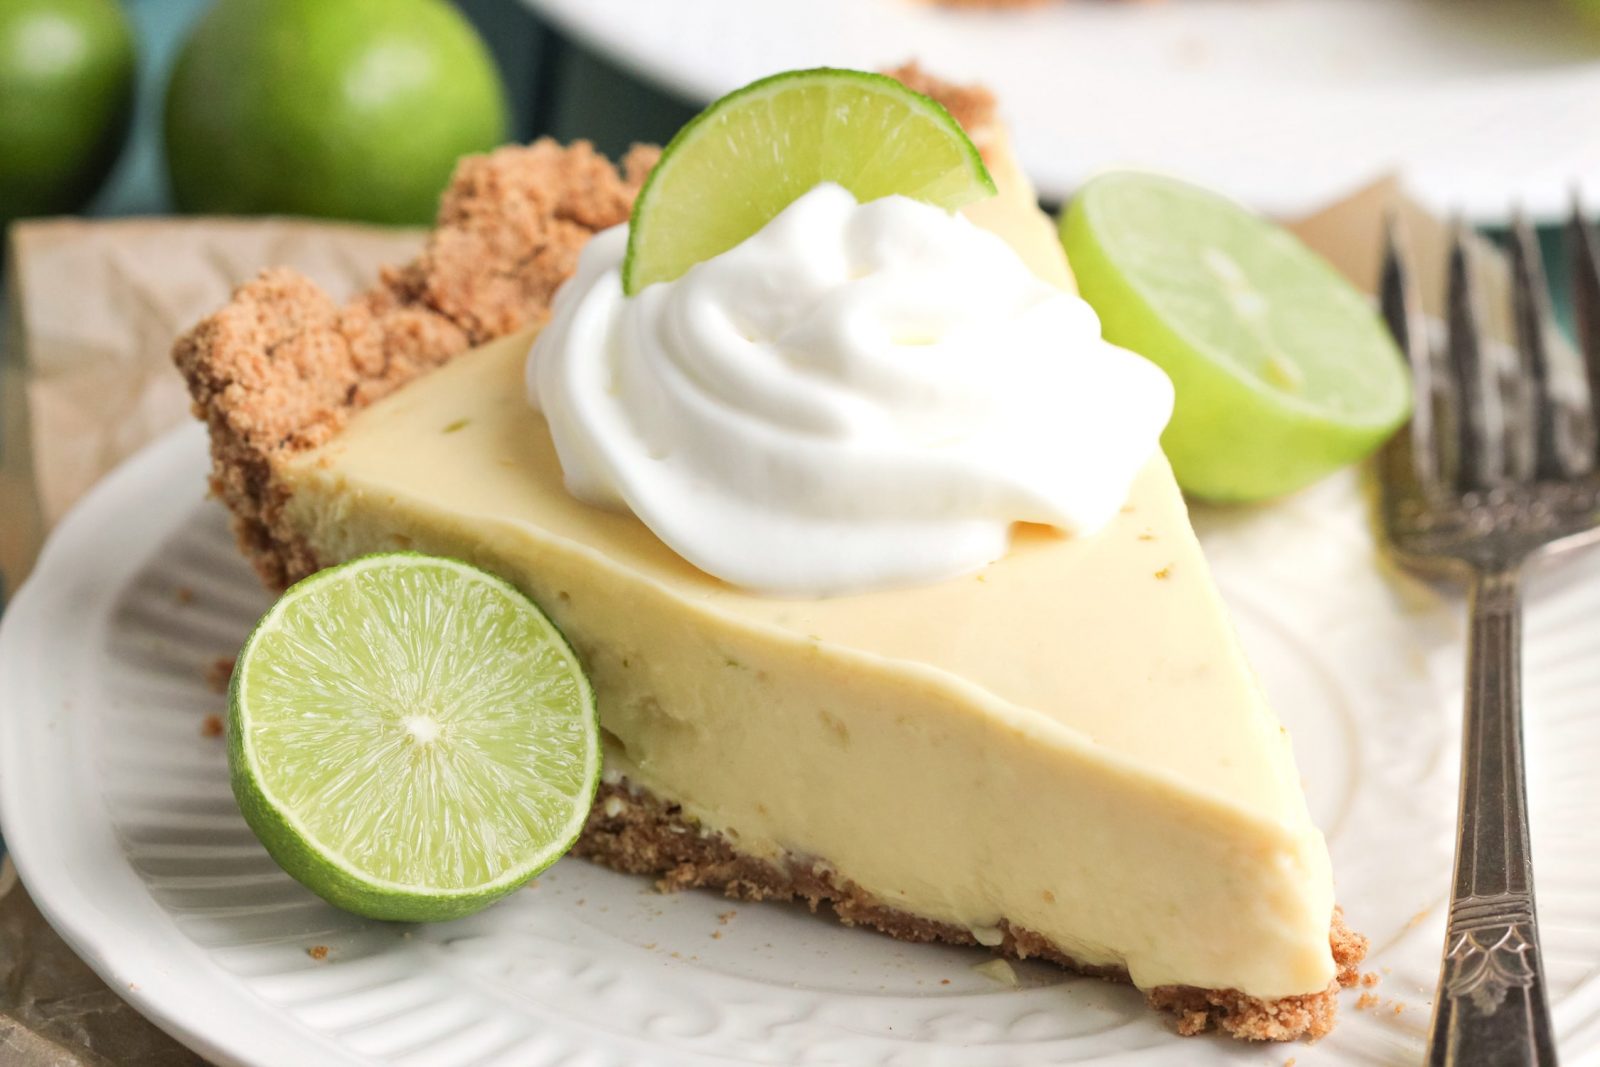 🎂 Don’t Be Shocked When We Guess Your Age and Birth Month from the Desserts You Like Key Lime Pie